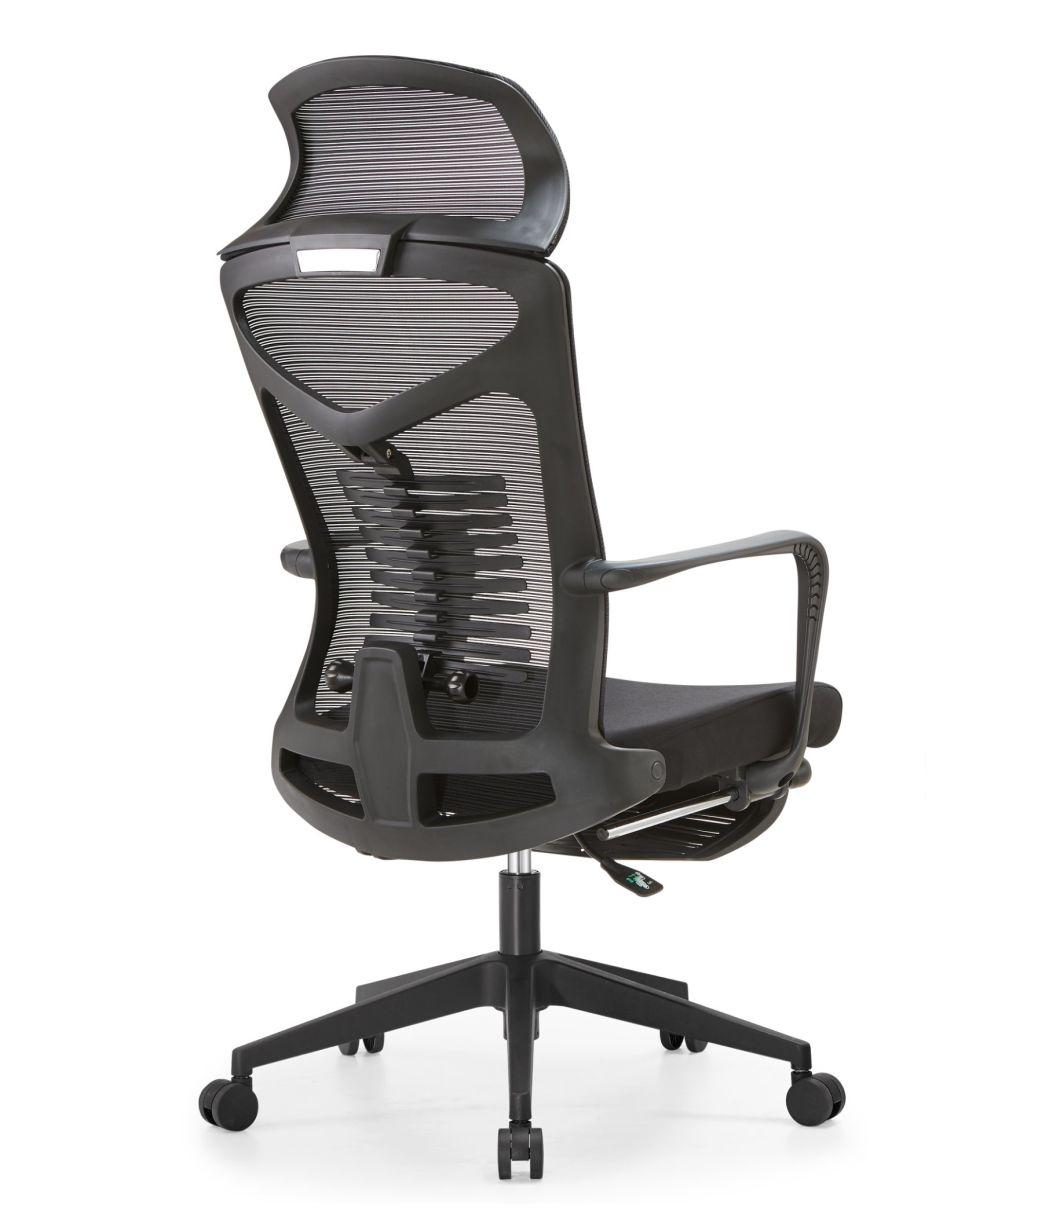 Professional High Quality New Design High Back Ergonomic Office Chair